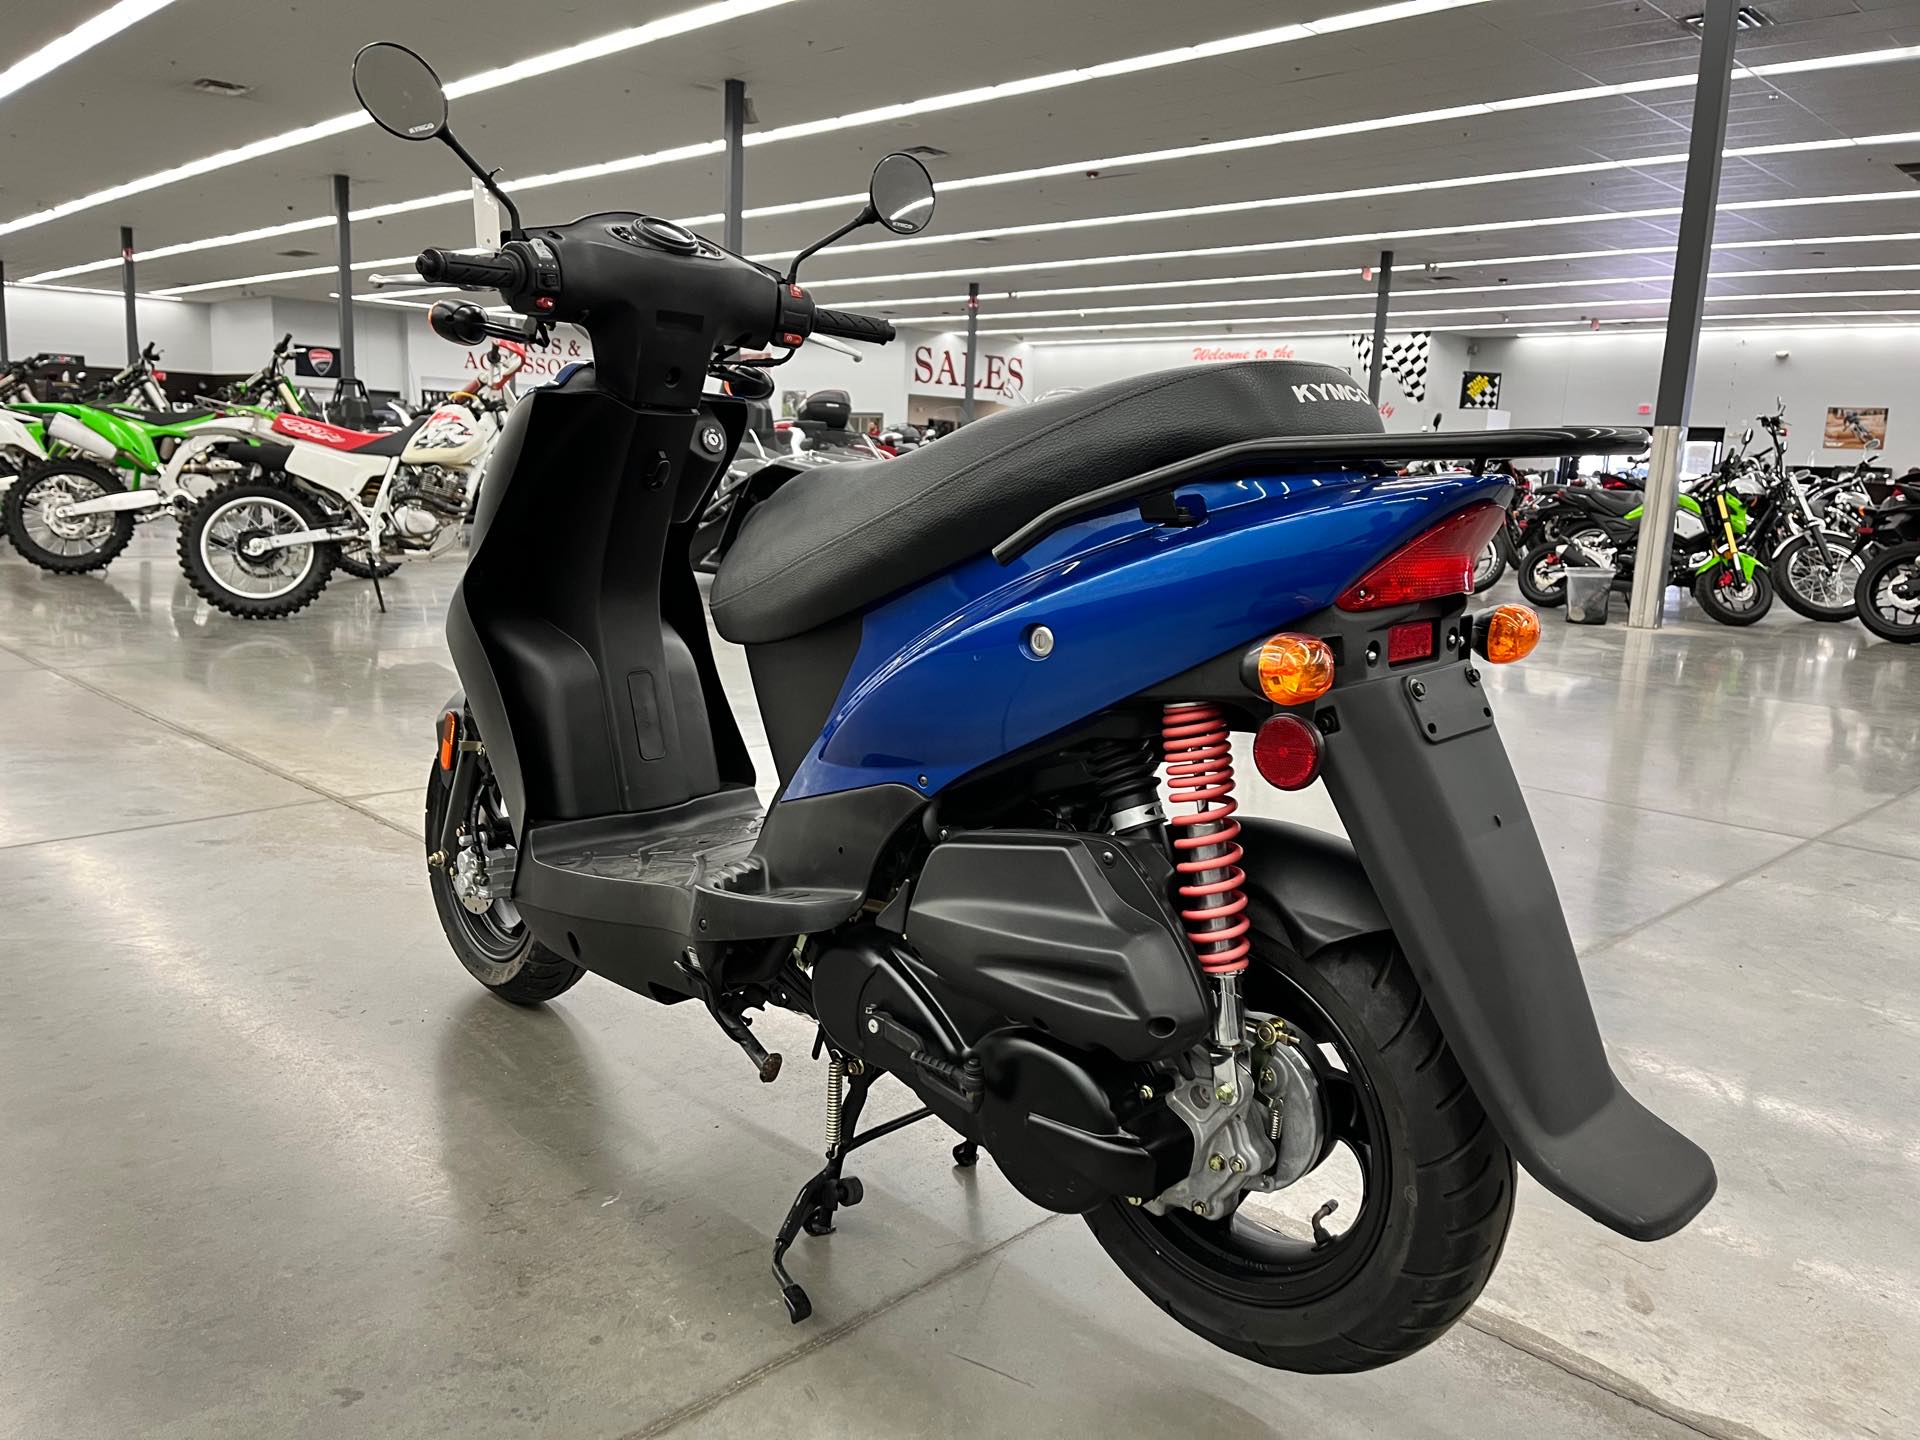 2009 KYMCO Agility 125 at Aces Motorcycles - Denver